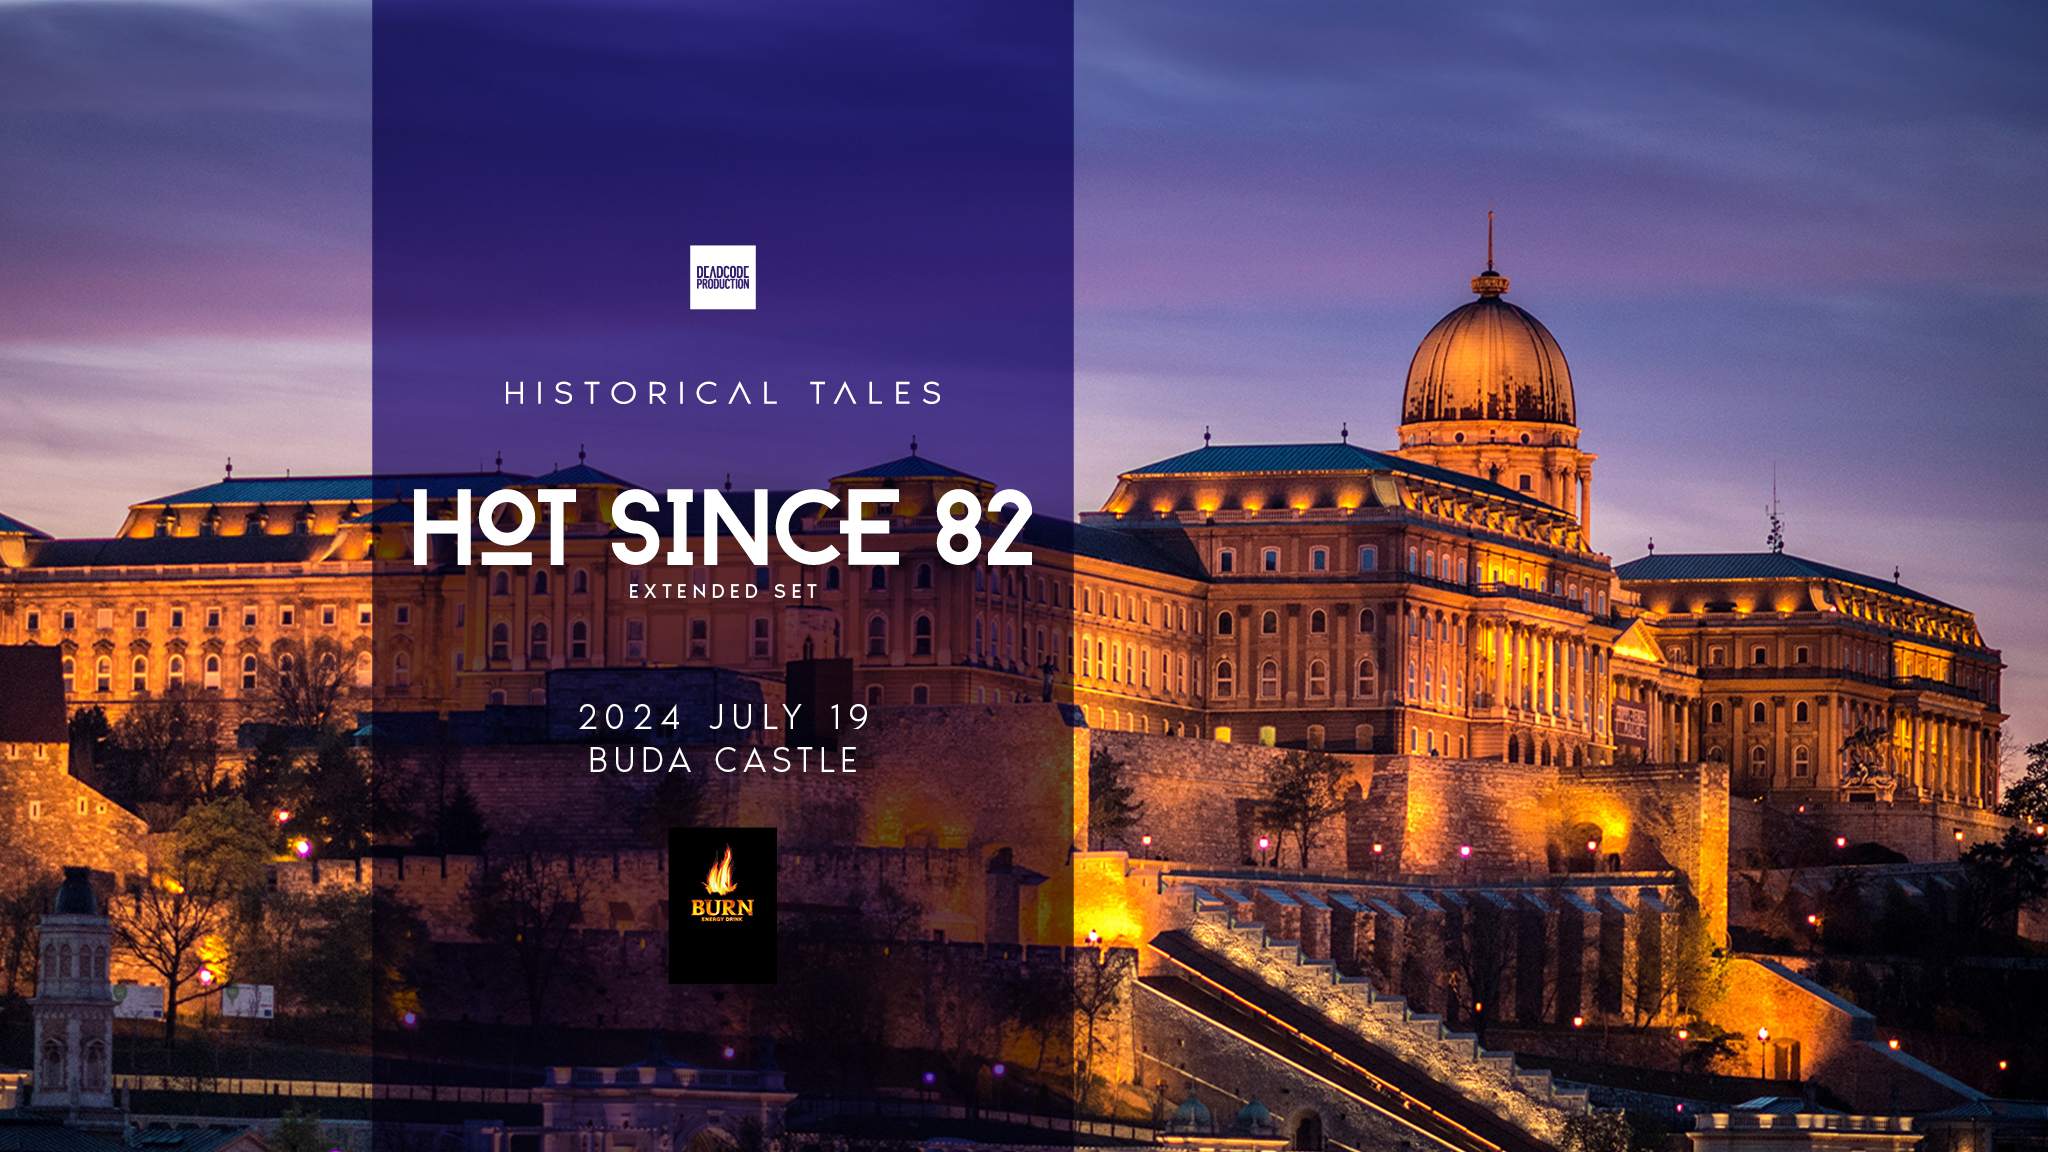 Historical Tales with Hot Since 82 at Buda Castle - Página frontal